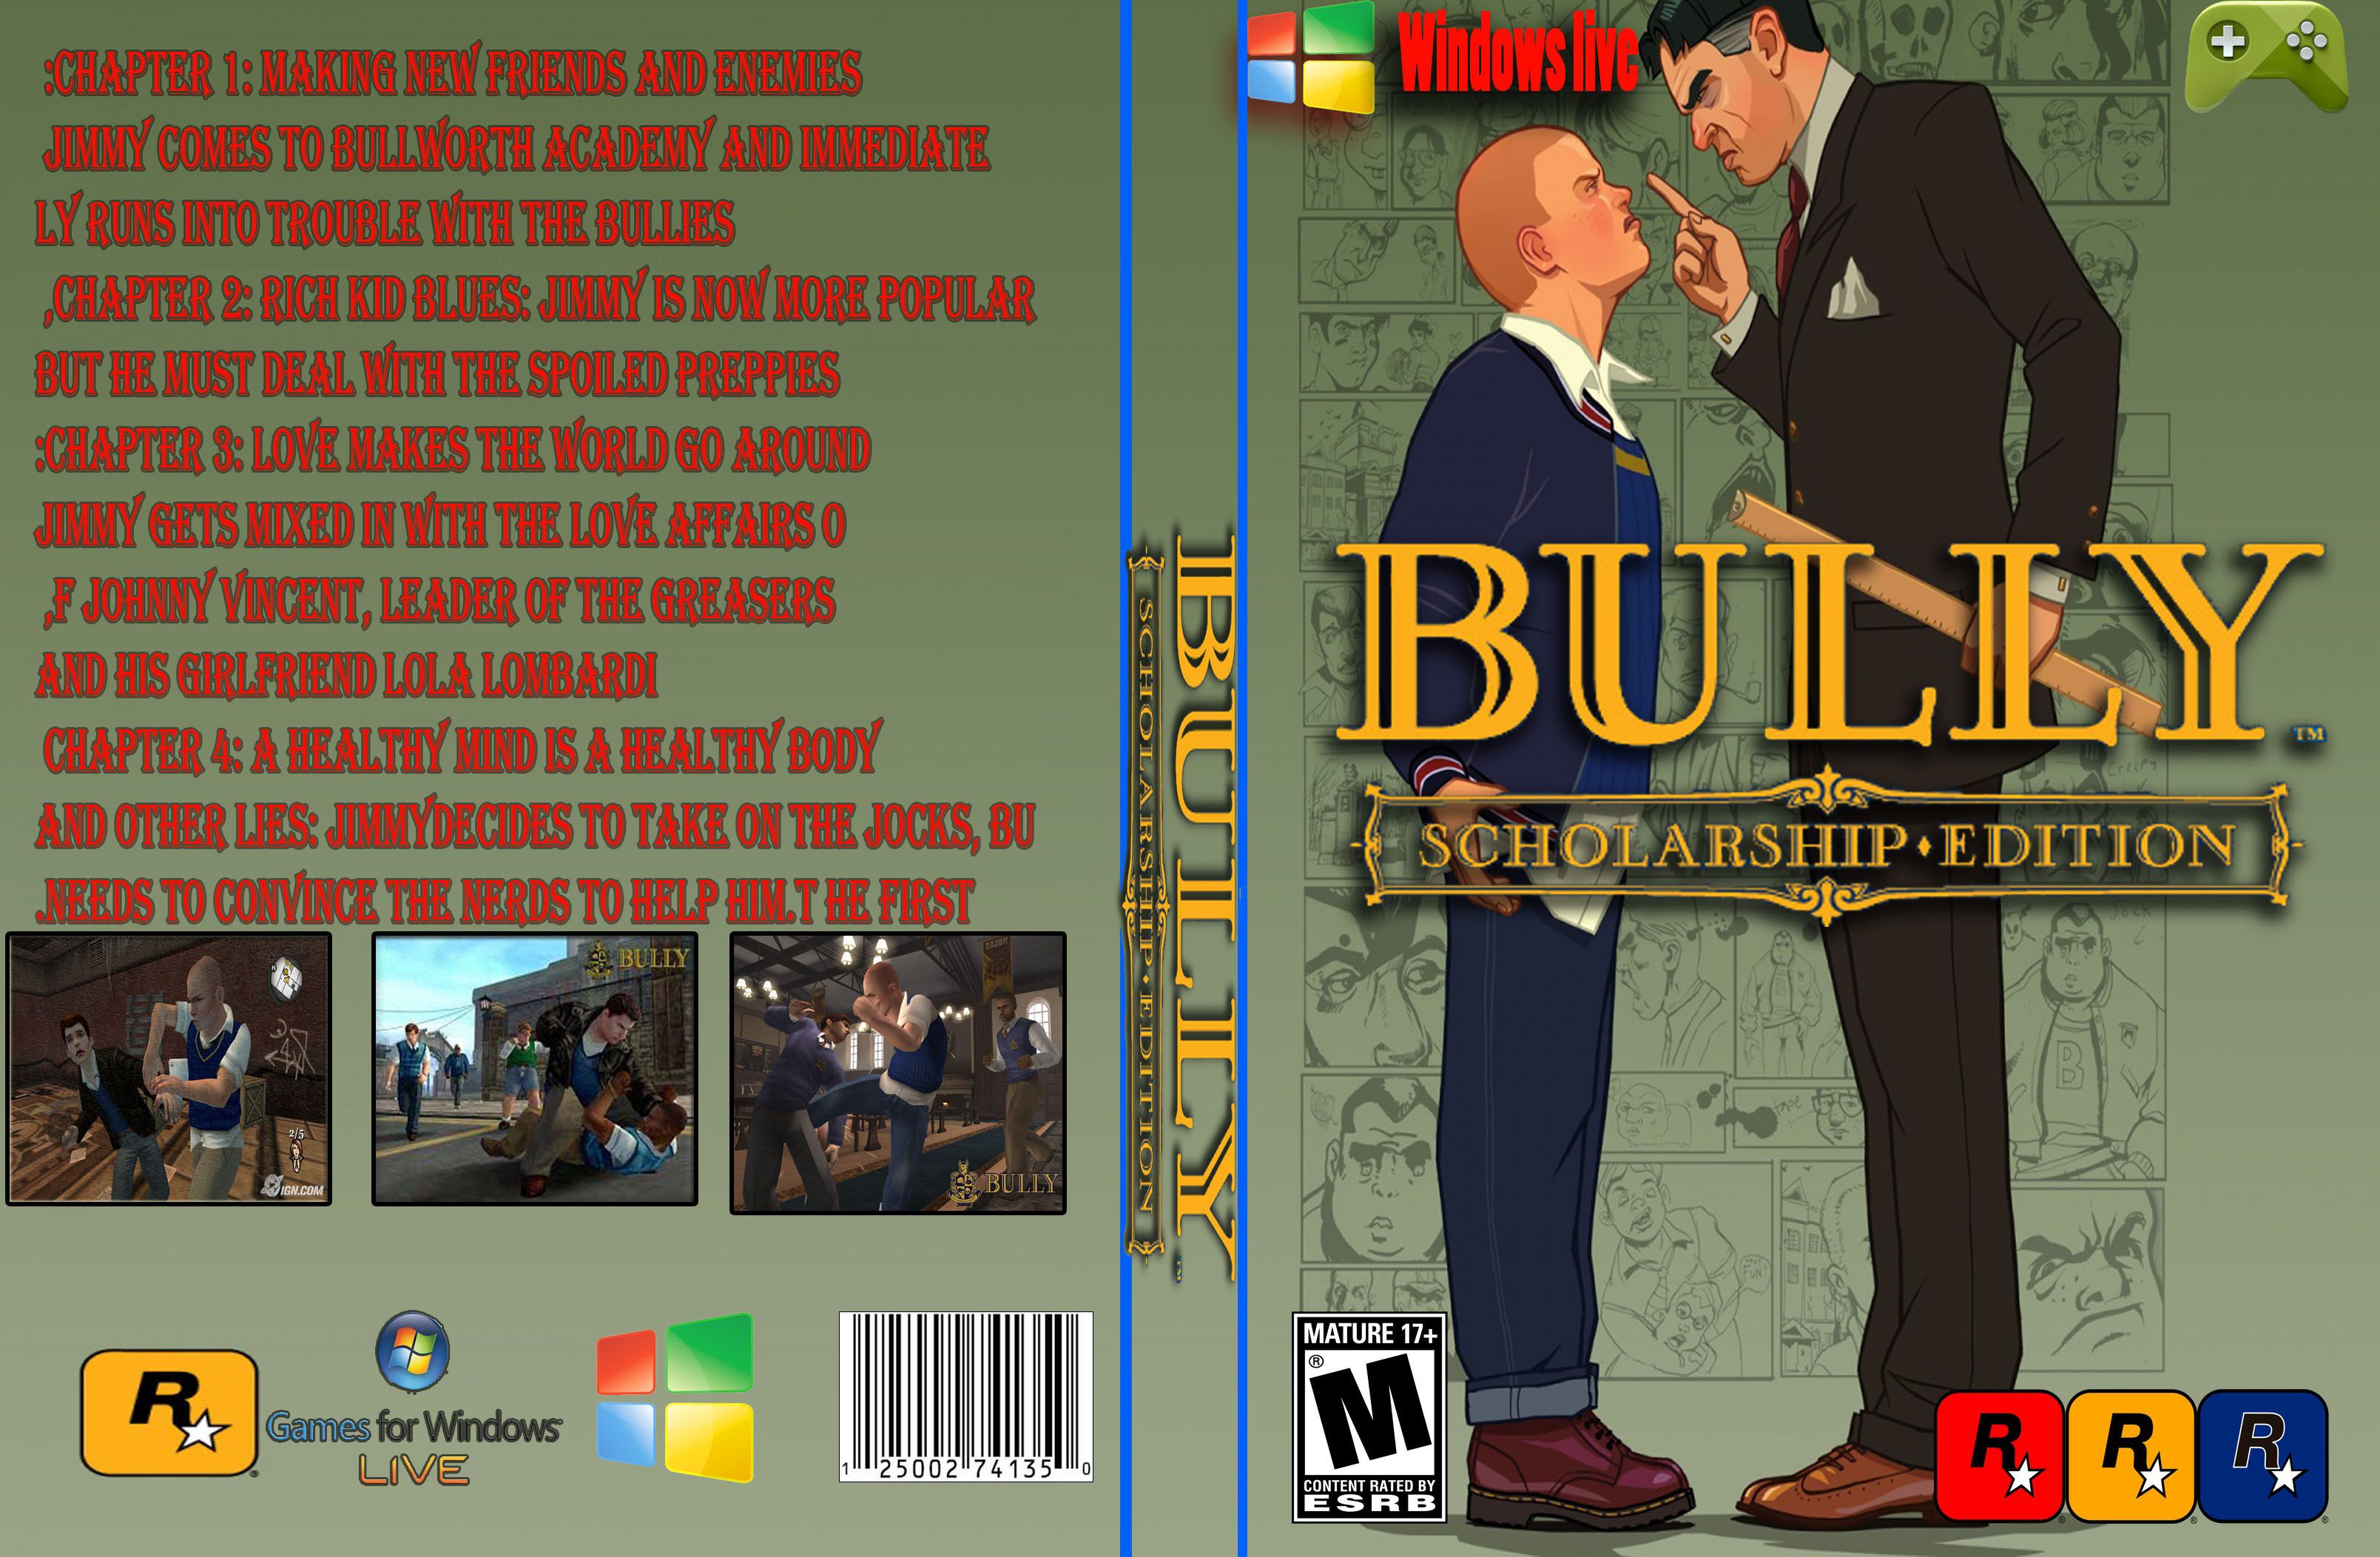 bully game trainer